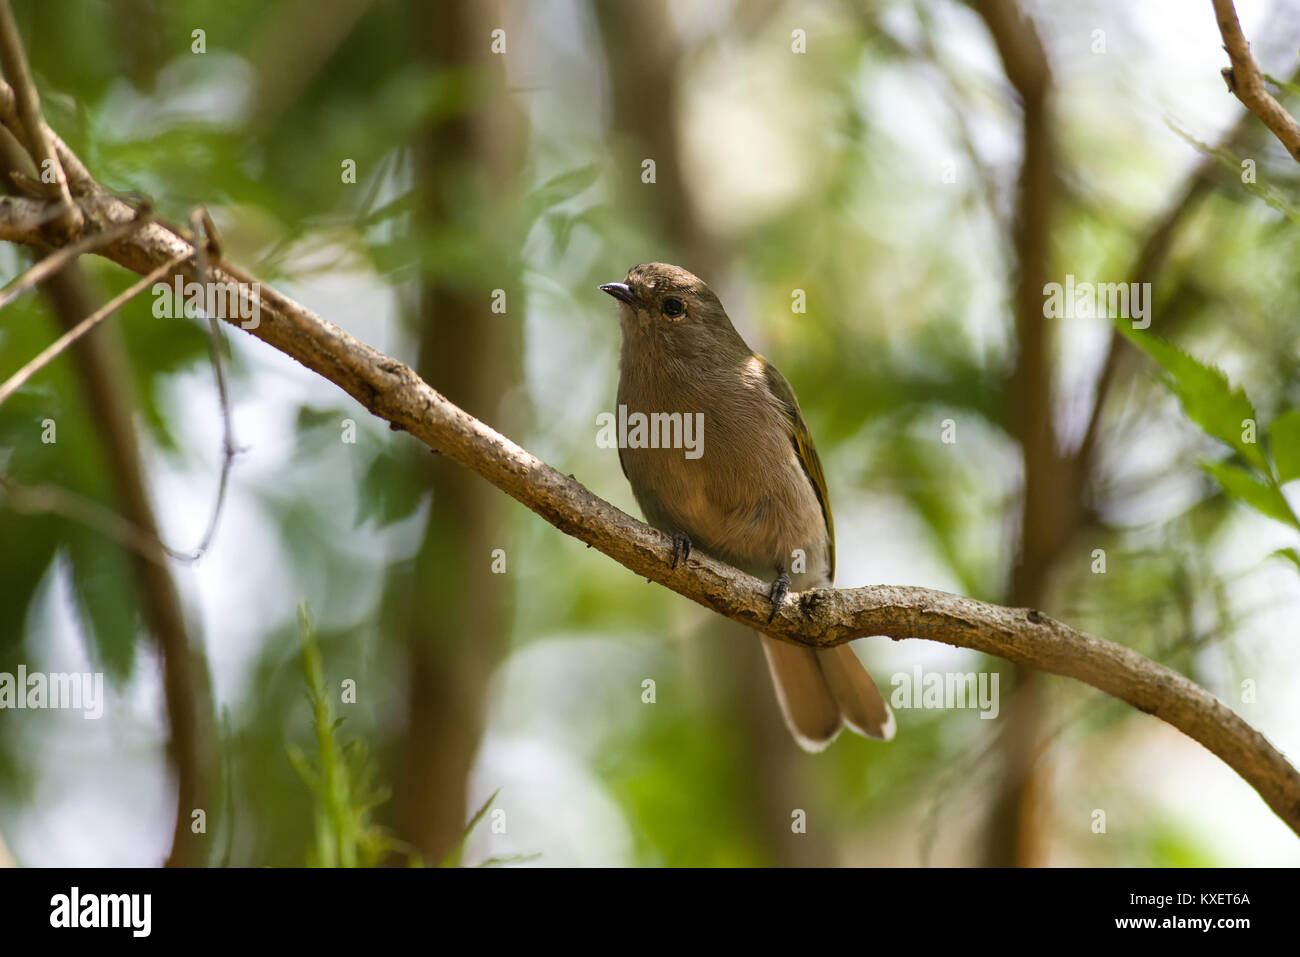 Eastern Green-backed Honeyguide or Honeybird (Prodotiscus zambesiae) perched on a branch in the shade, Nairobi, Kenya, East Africa Stock Photo